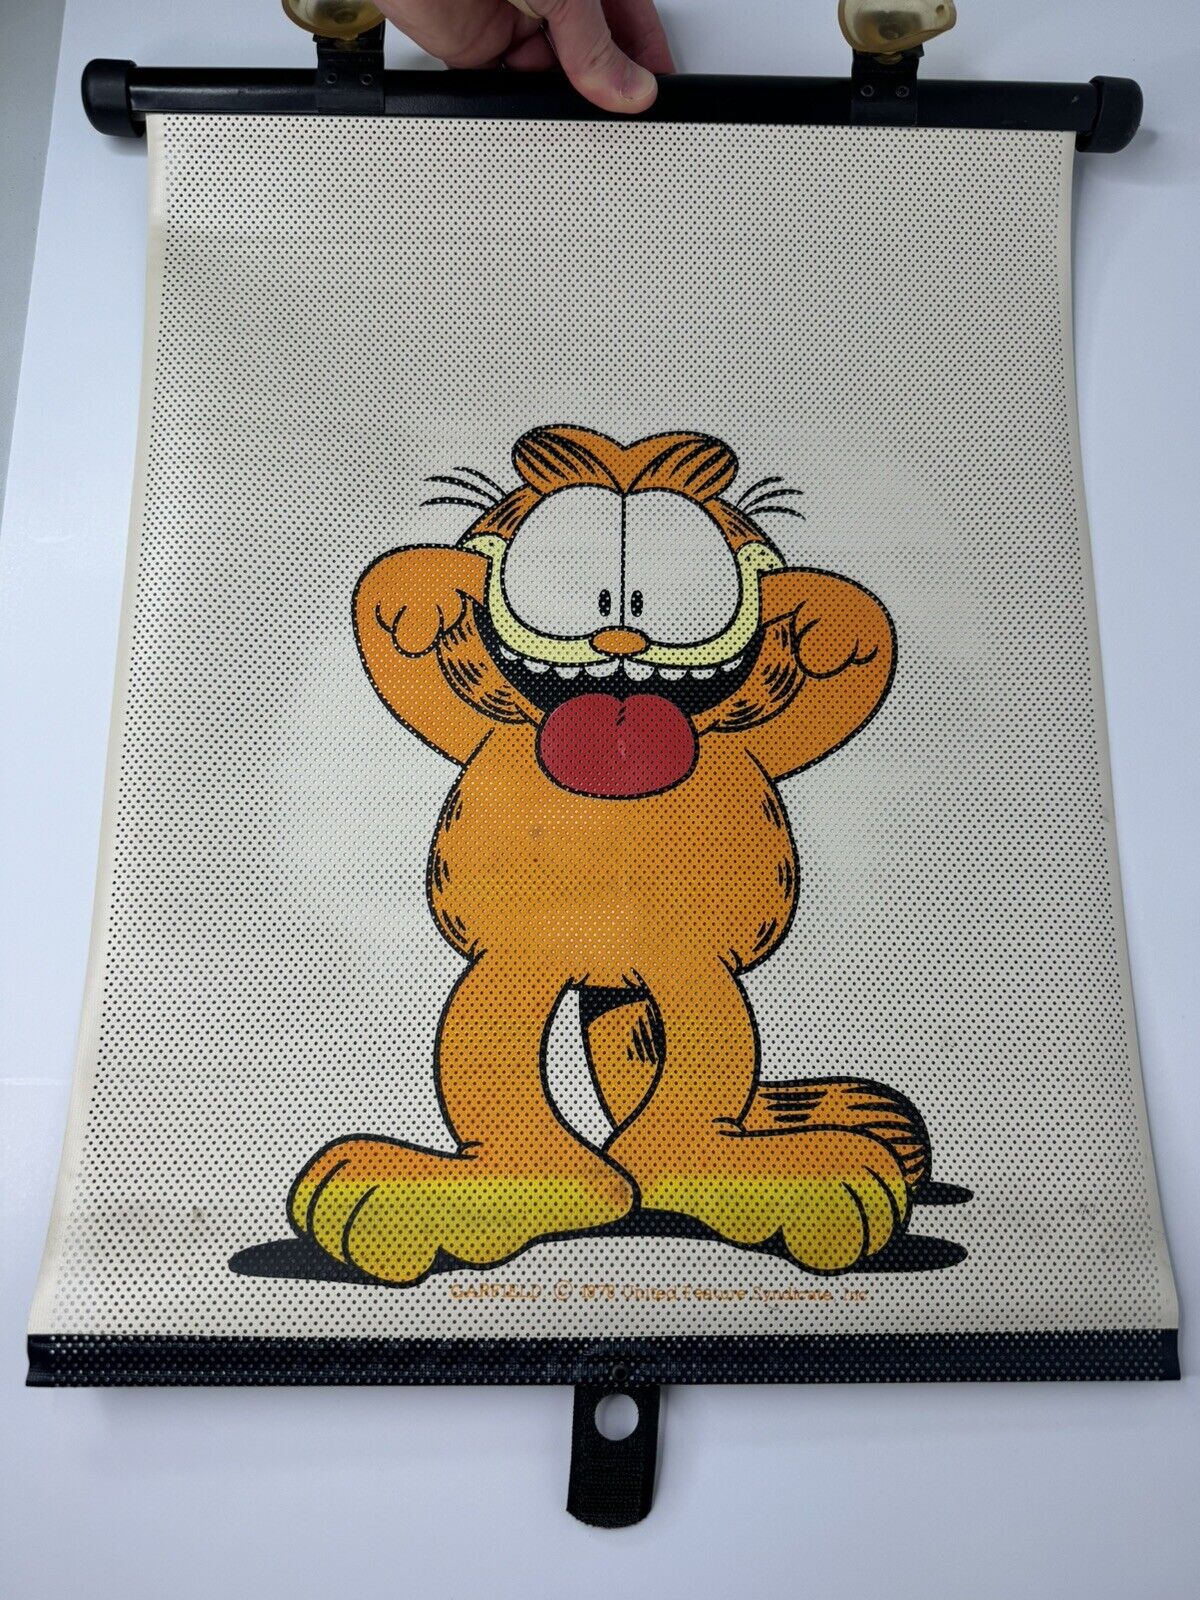 Vintage 1978 Garfield Deluxe Roll-A-Way Auto Car Sun Shield United Feature Synd.